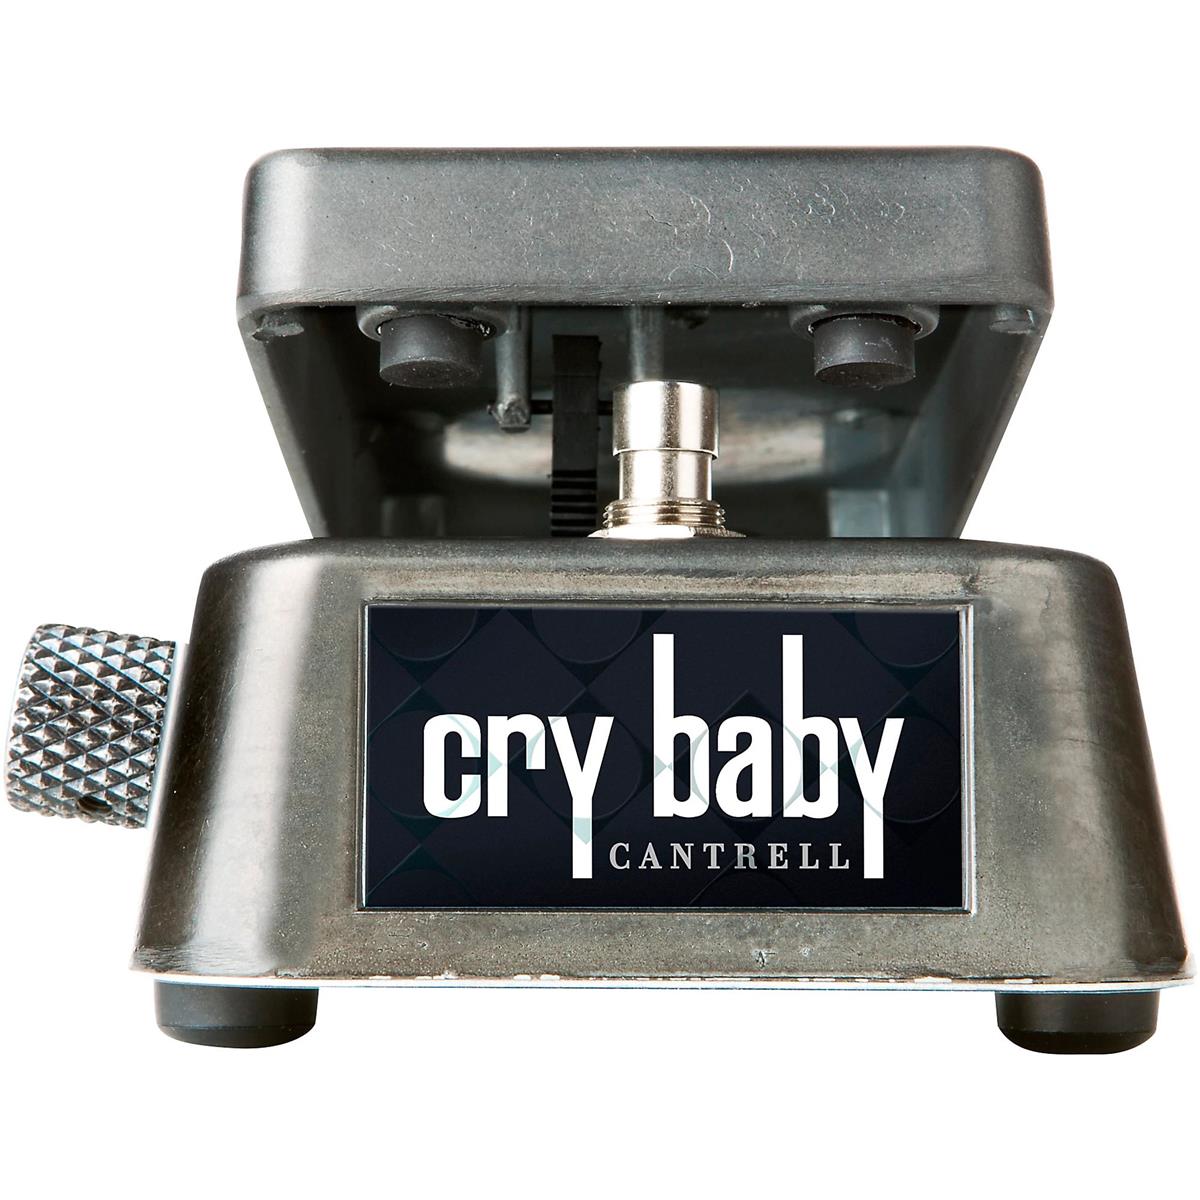 Image of Dunlop Cry Baby Jerry Cantrell Rainier Fog Wah Pedal